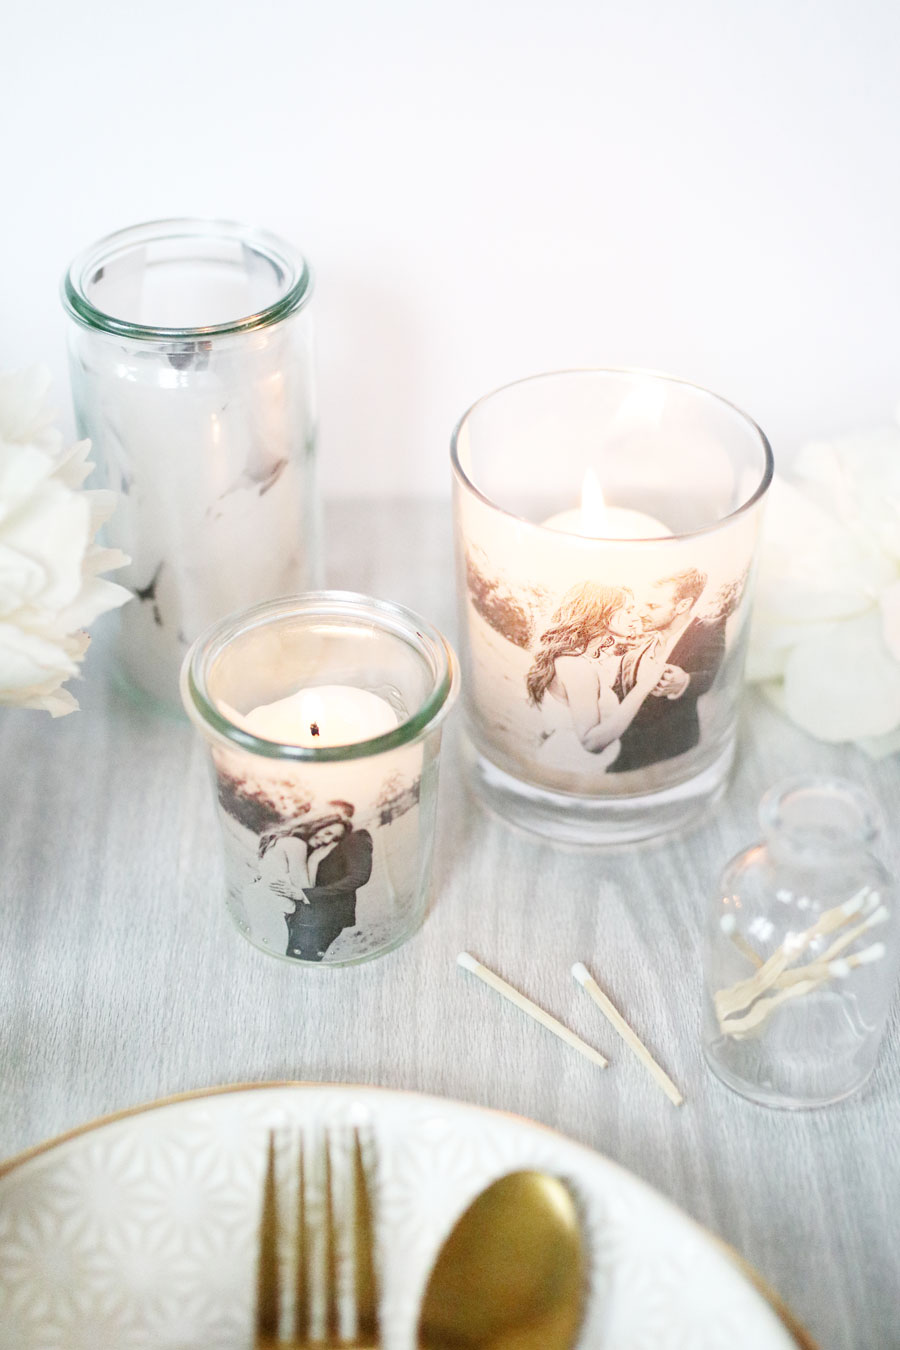 These DIY candle holders incorporate photos of you and your love and are sure to give your guests something to talk about at your wedding reception.